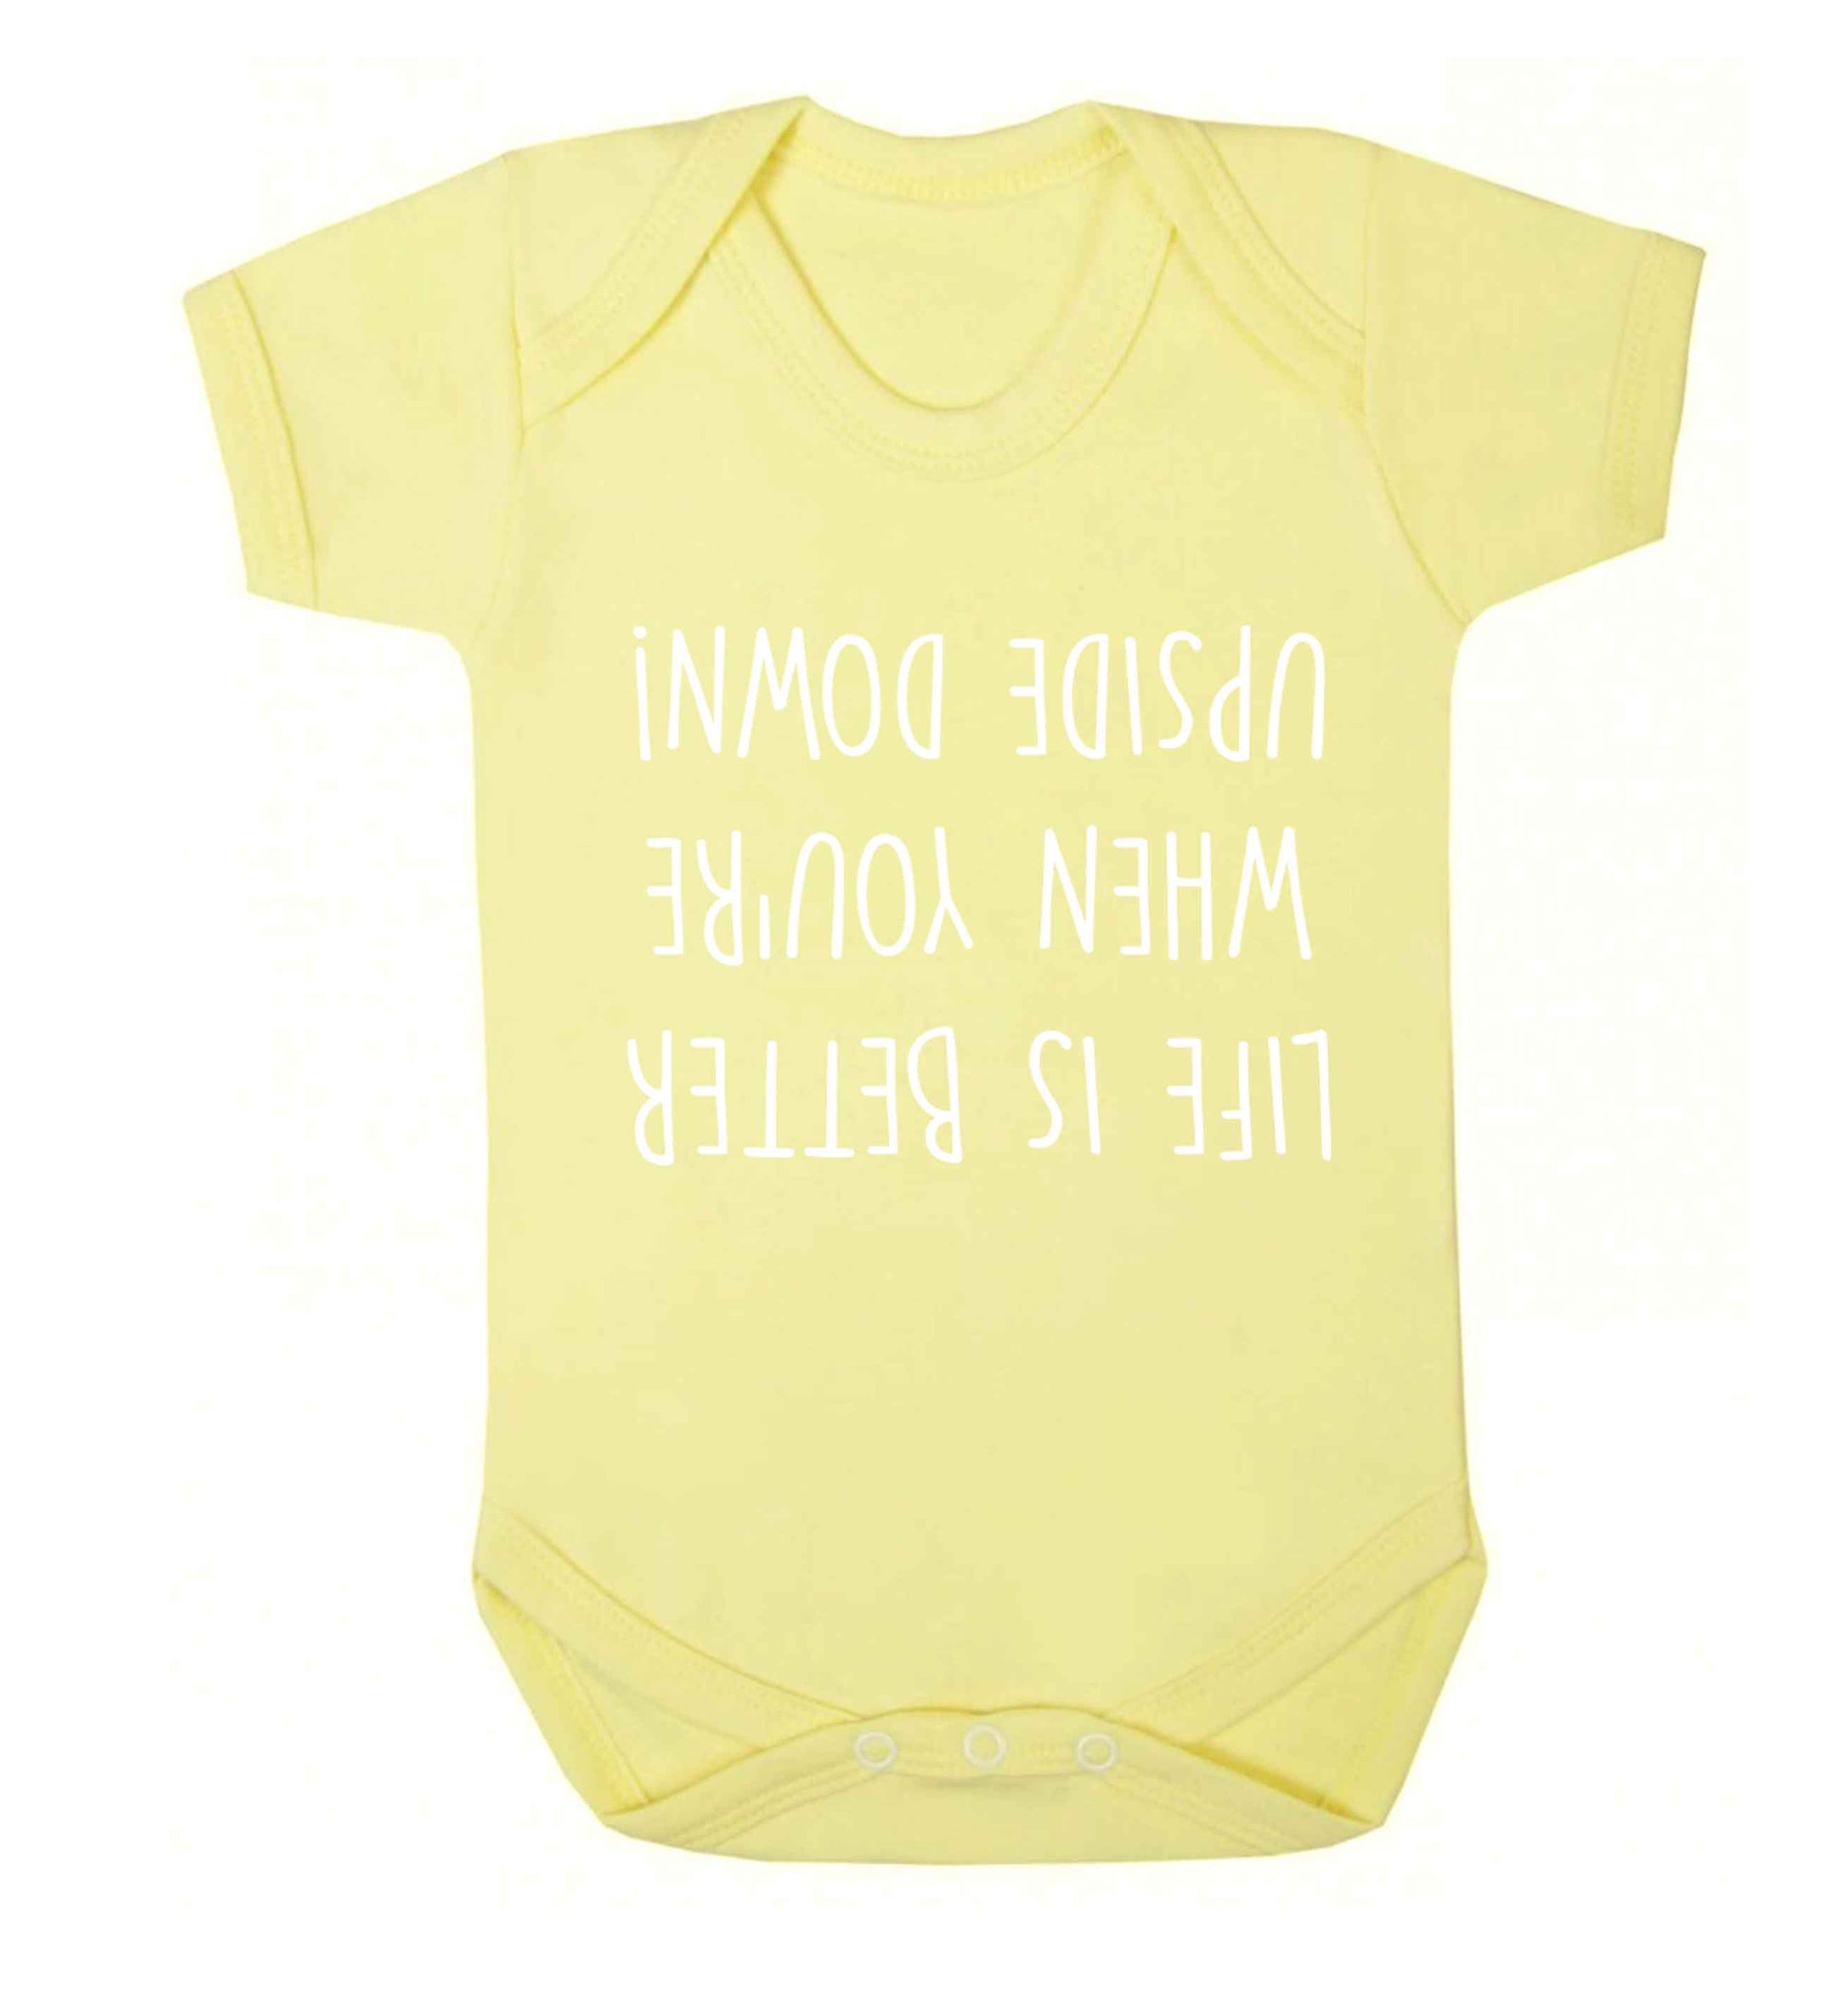 Life is better upside down Baby Vest pale yellow 18-24 months